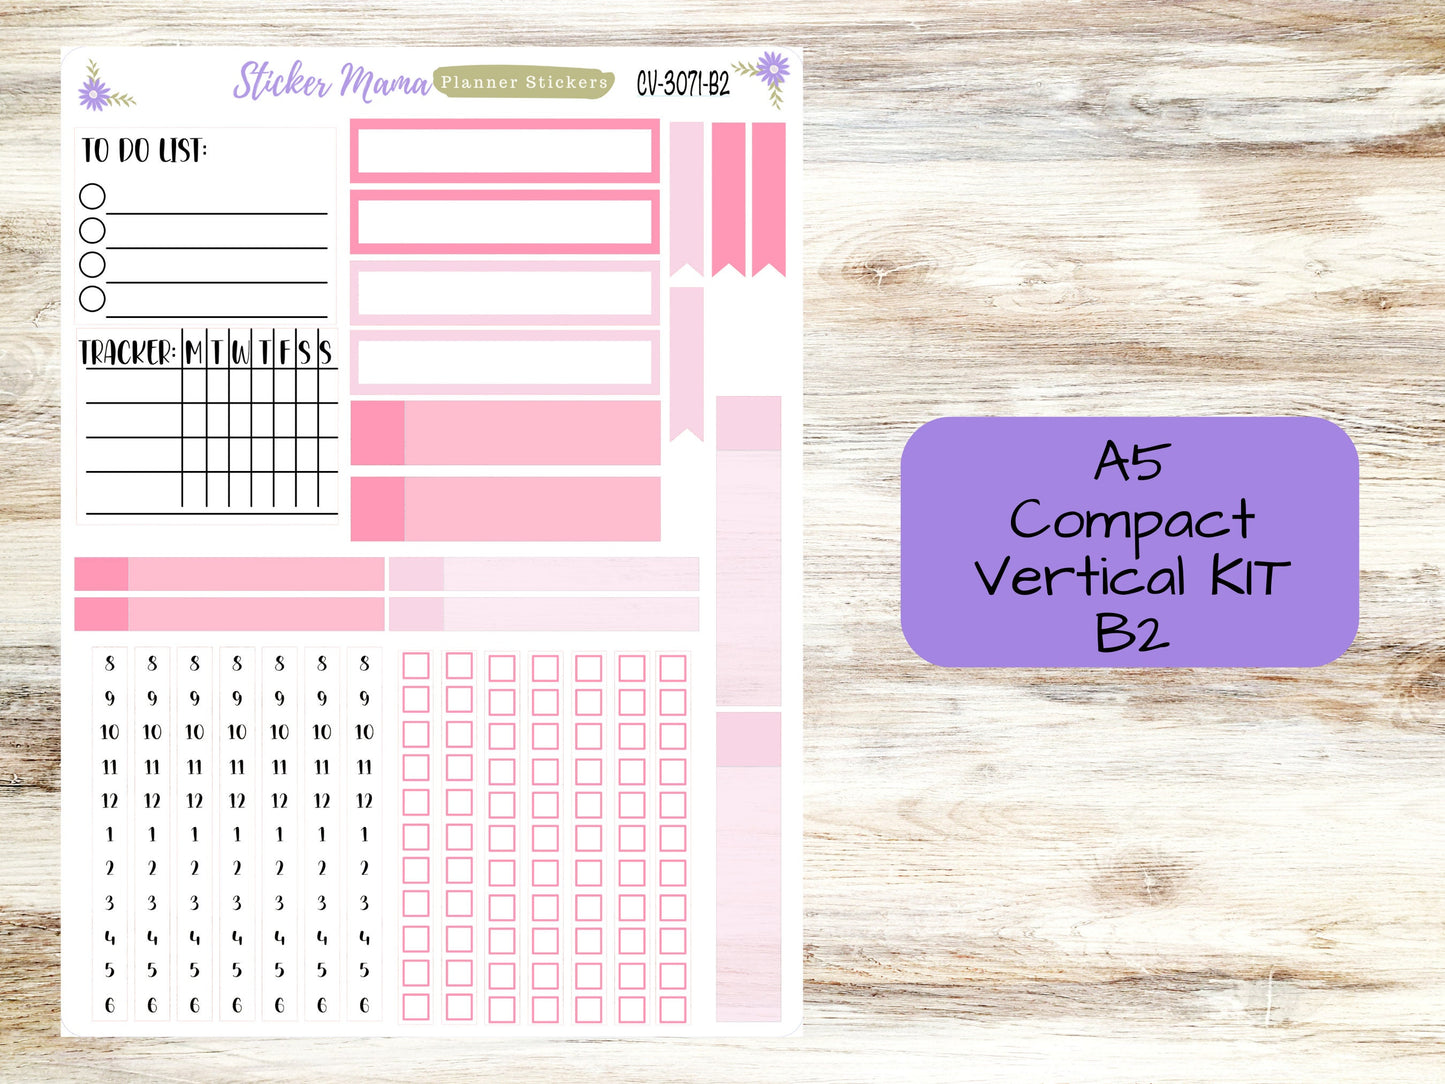 CV3071 || BREAST CANCER || Compact Vertical || A5 Weekly Kit || Planner Stickers || Erin Condren Compact Vertical Weekly Kit